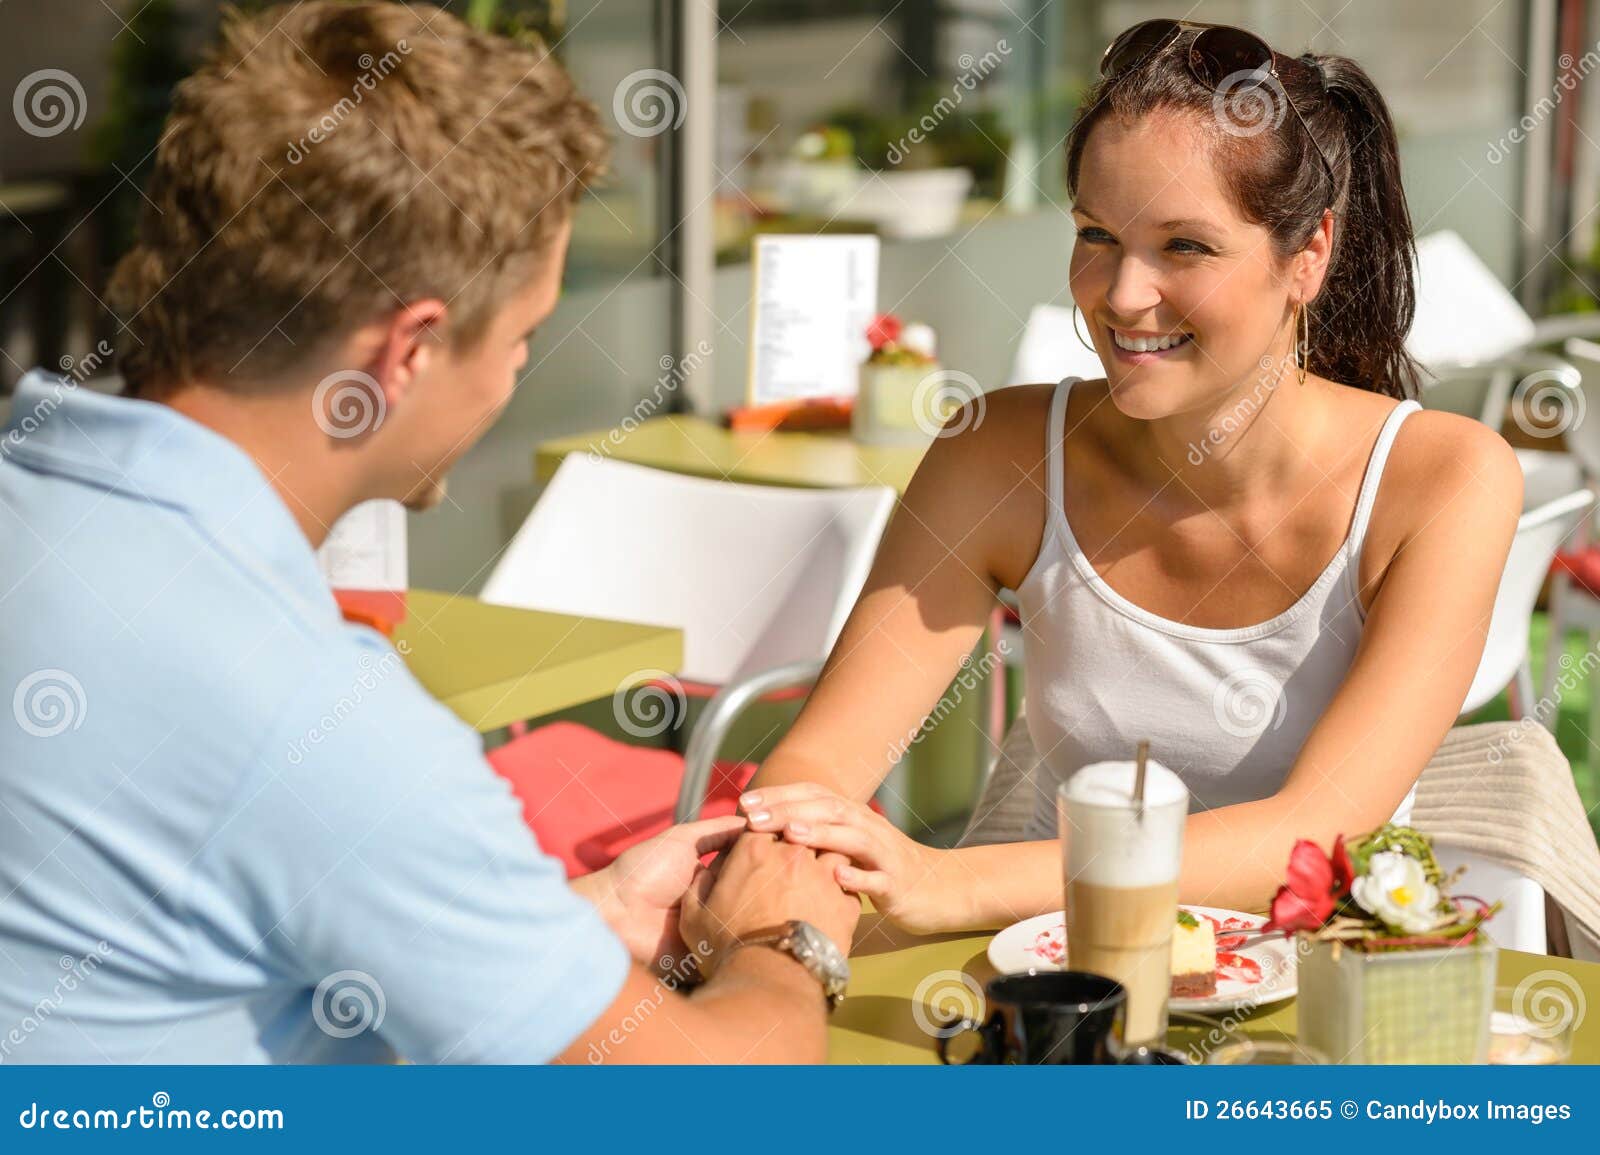 couple flirting holding hands at cafe bar